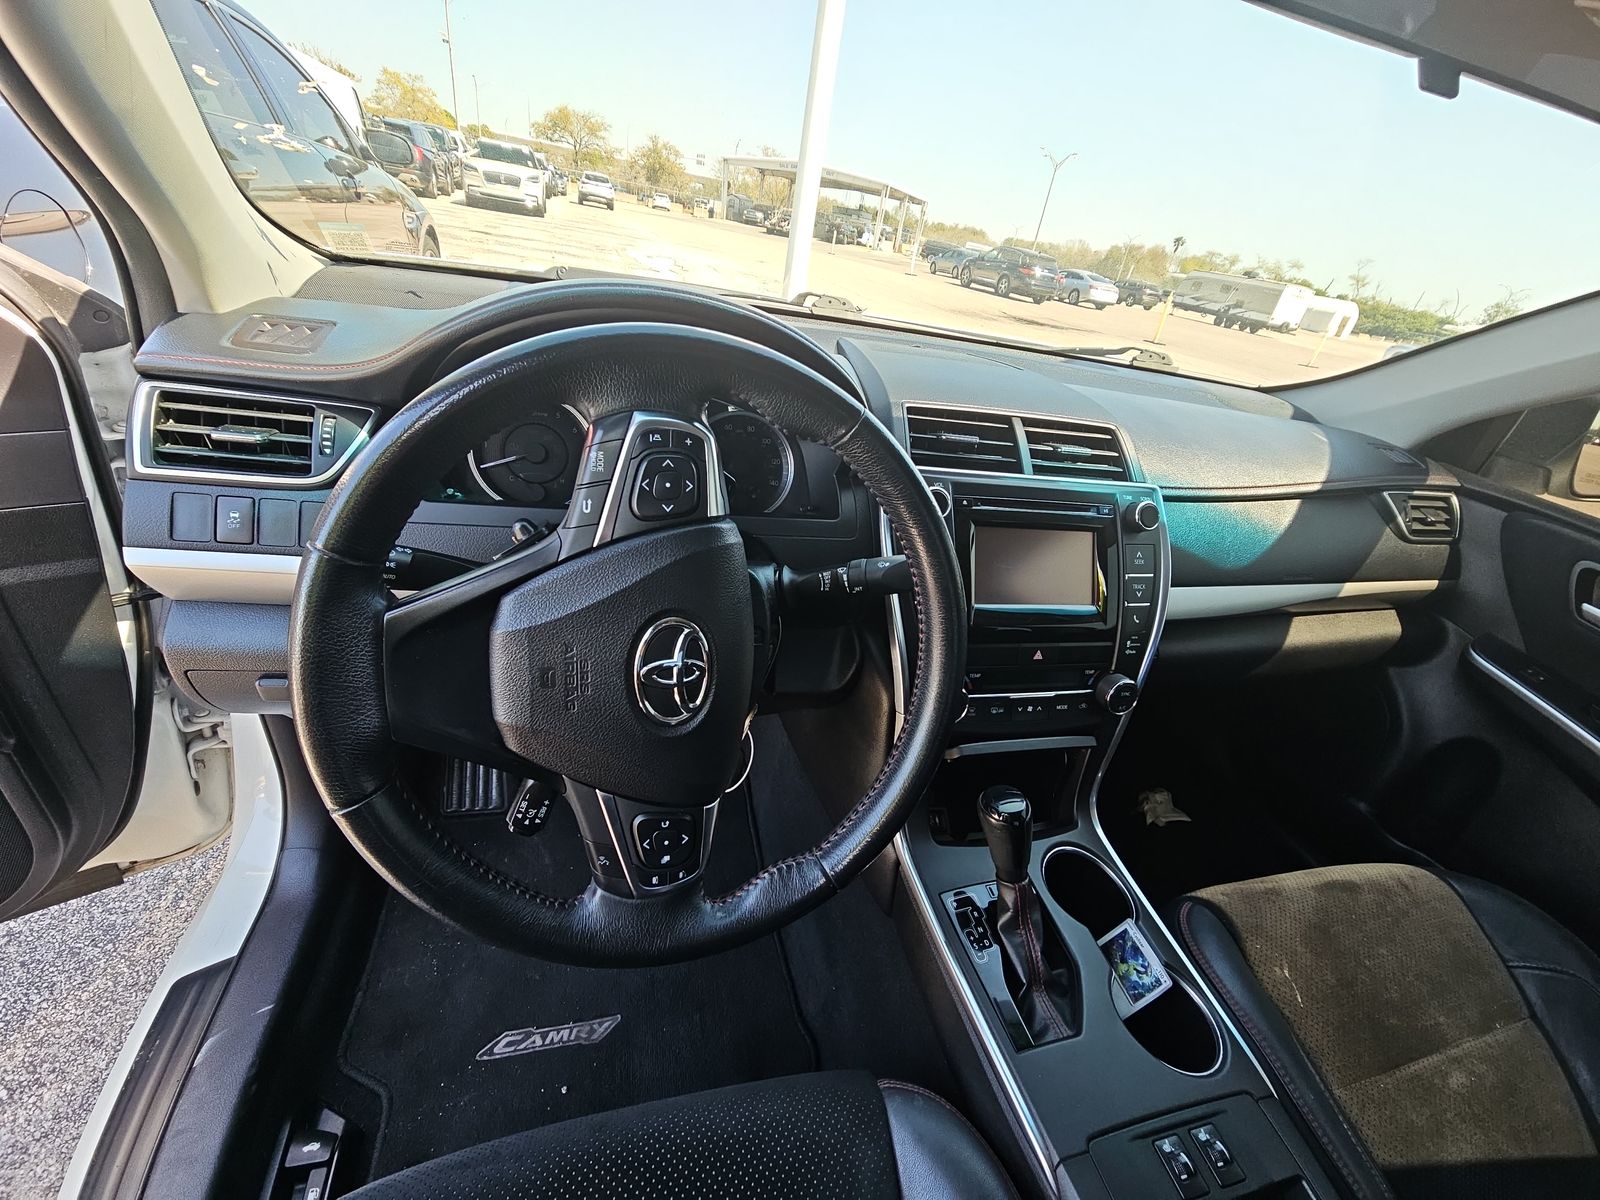 2015 Toyota Camry XSE FWD